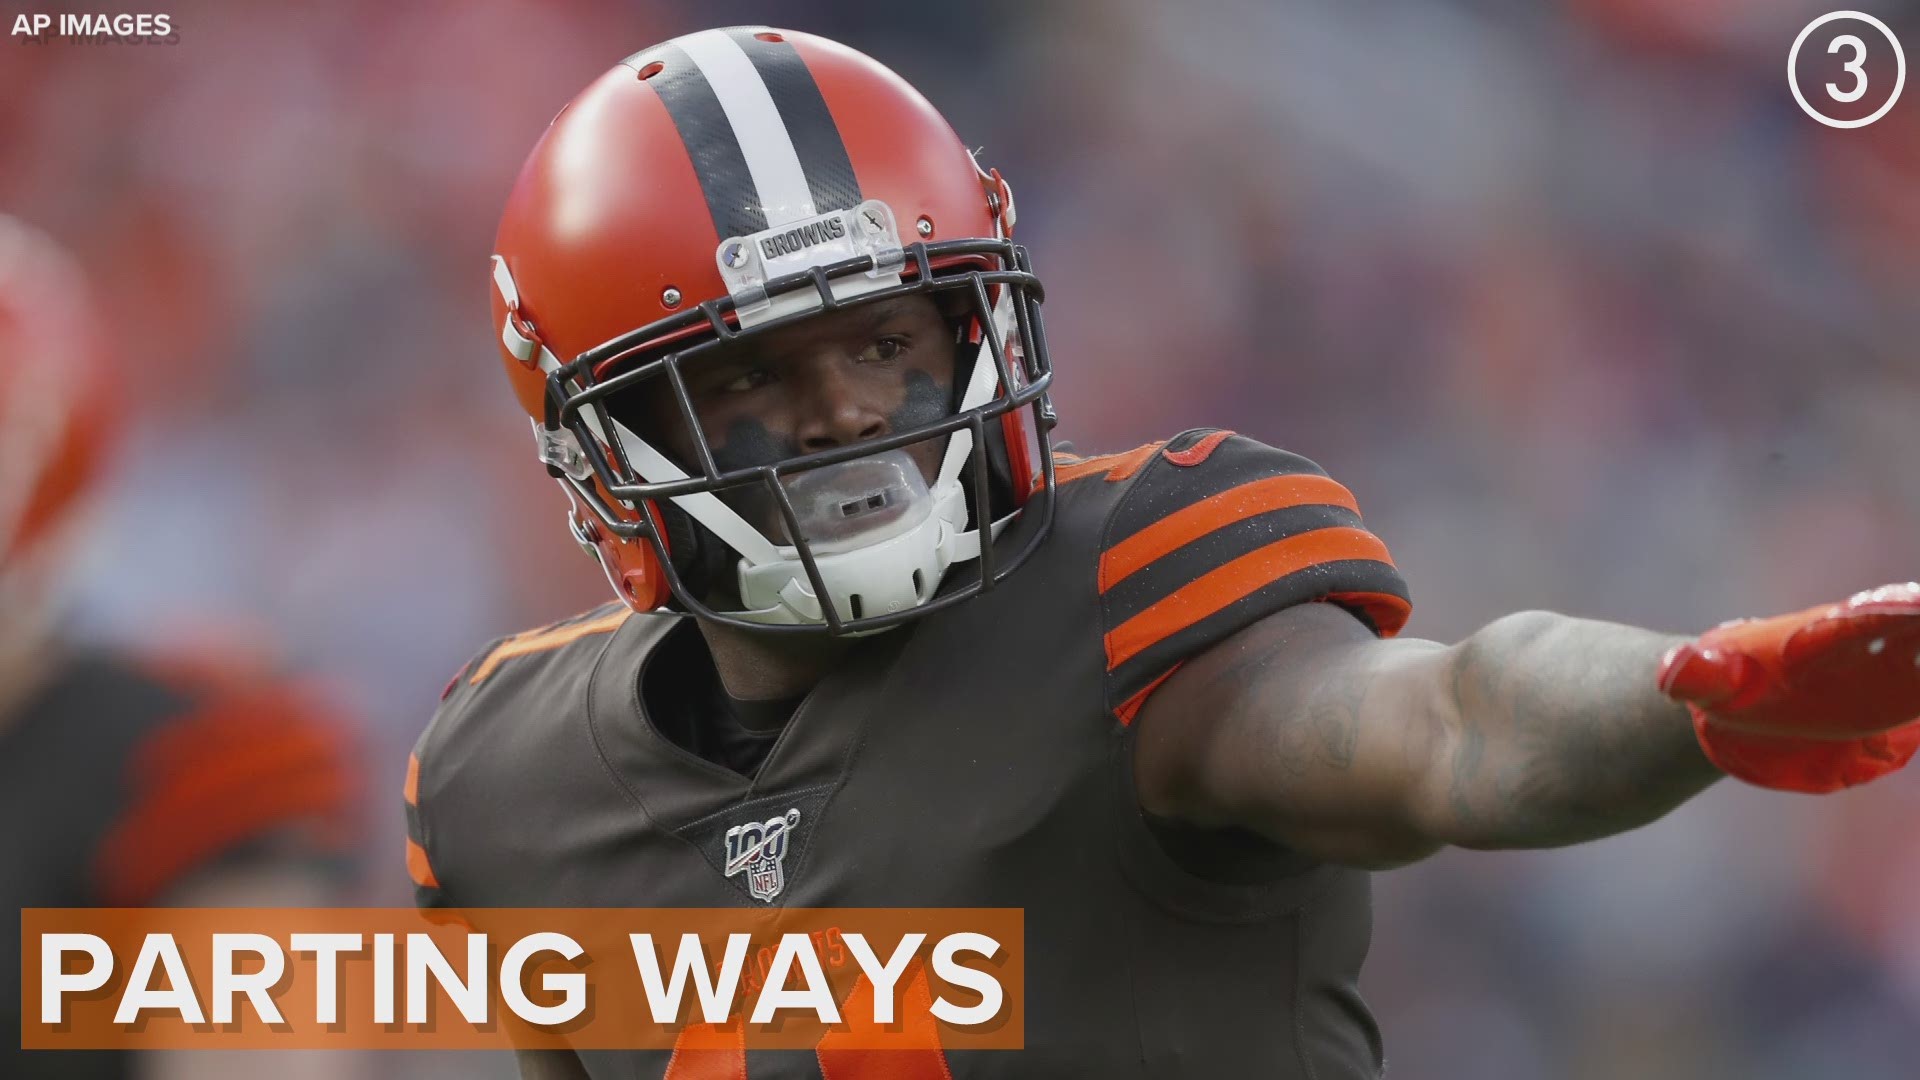 Parting ways!  The Cleveland Browns announced on Thursday that they have waived wide receiver Antonio Callaway.